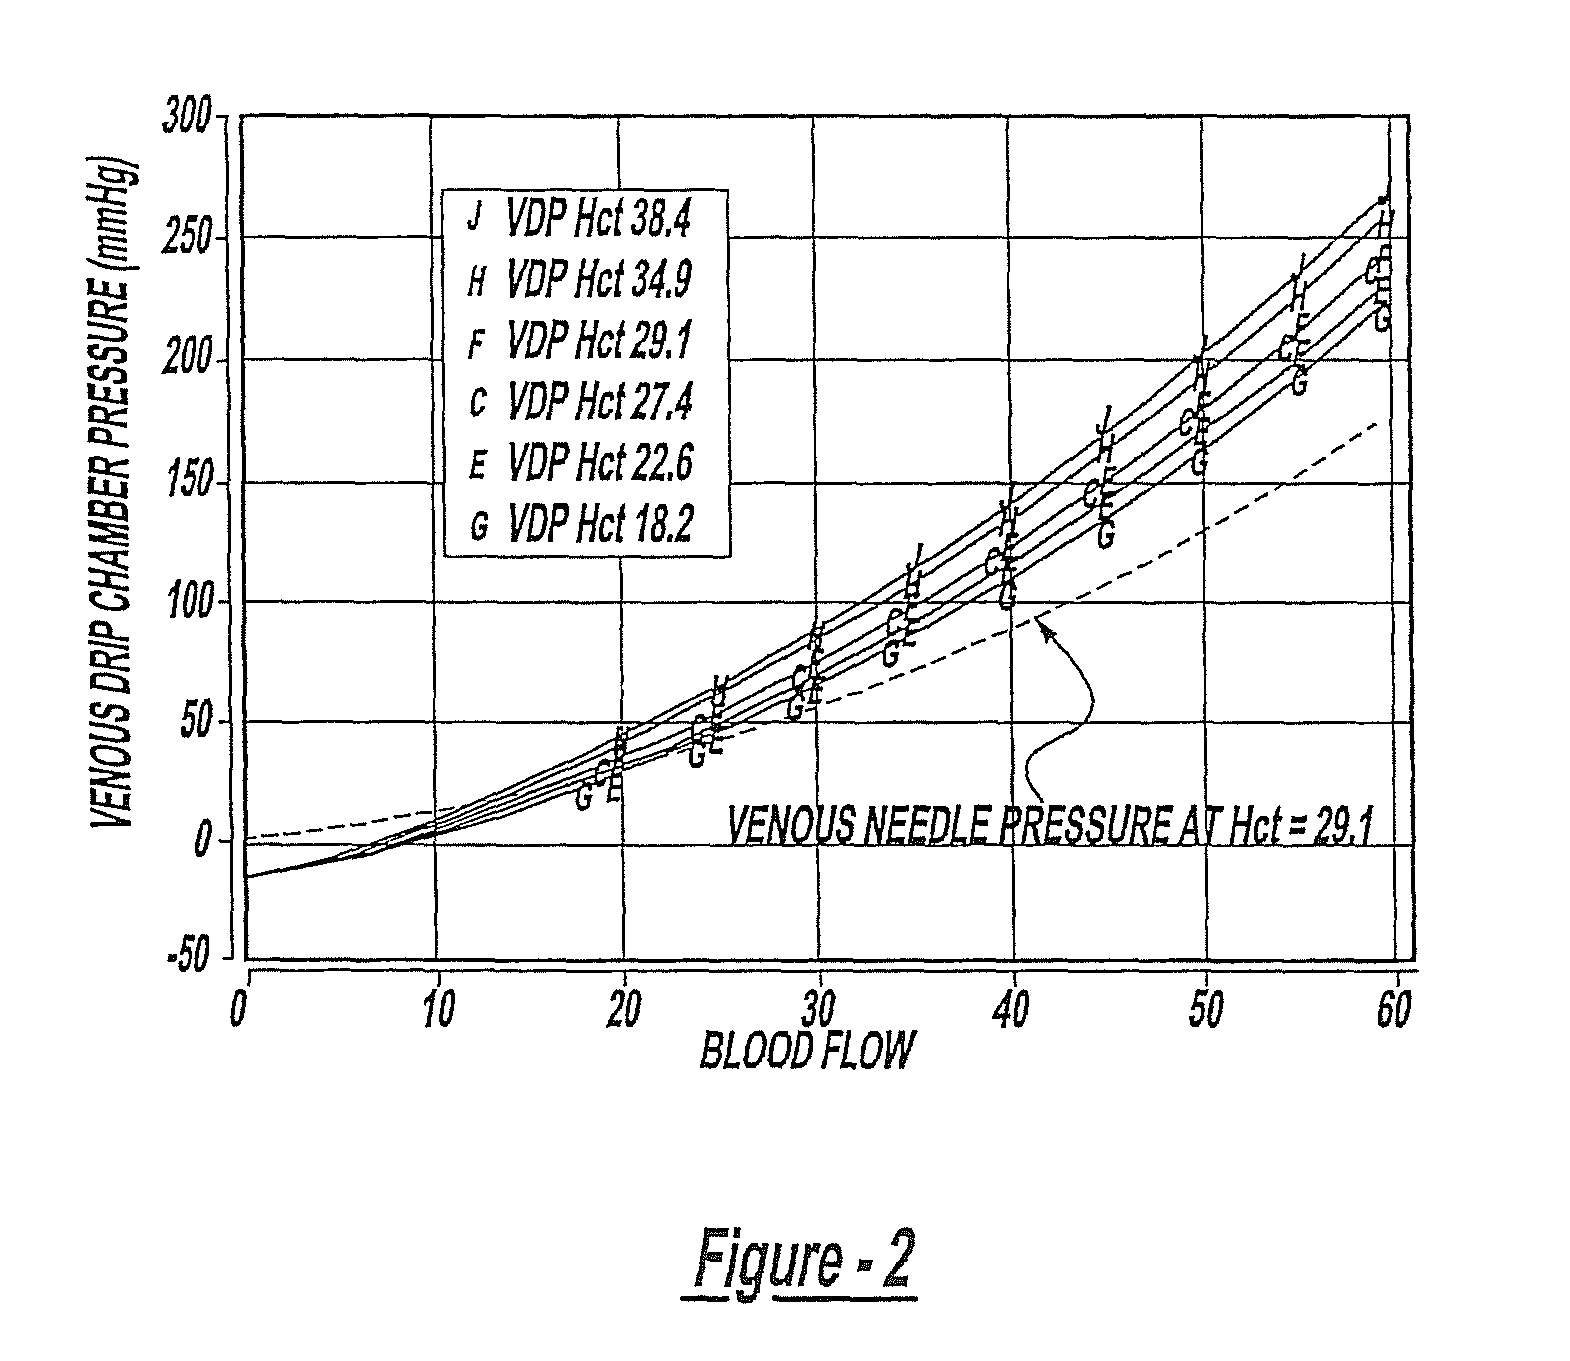 Method of monitoring dislodgement of venous needles in dialysis patients